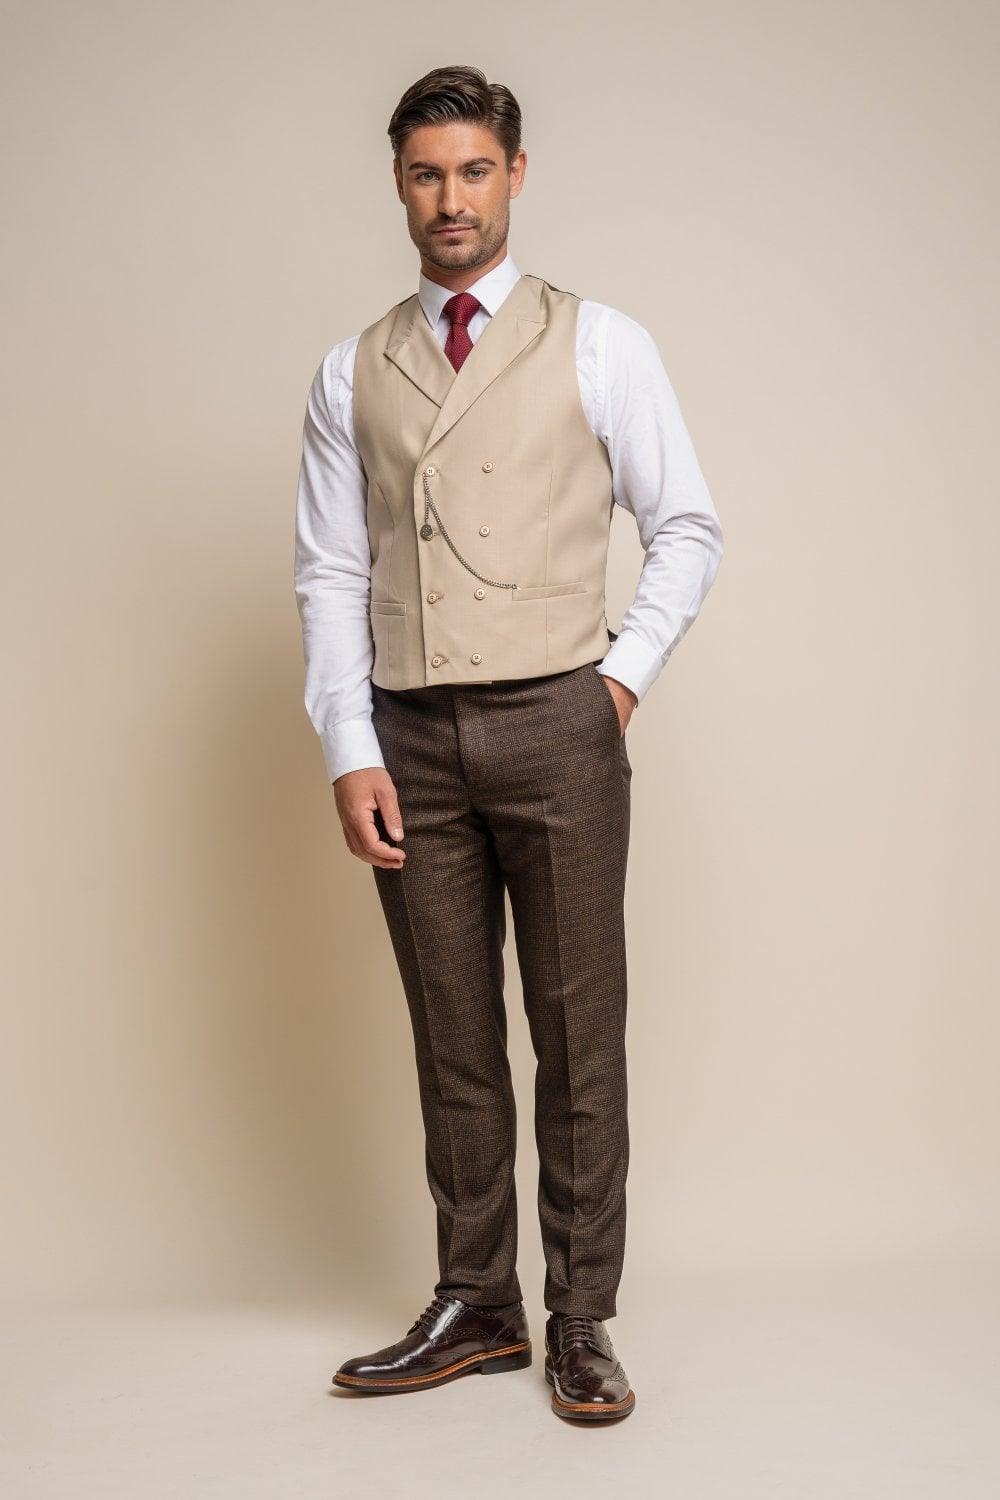 Cranberry Street Slim Fit Chocolate Brown Mixed Suit With Basket Weave  Waistcoat | MrGuild